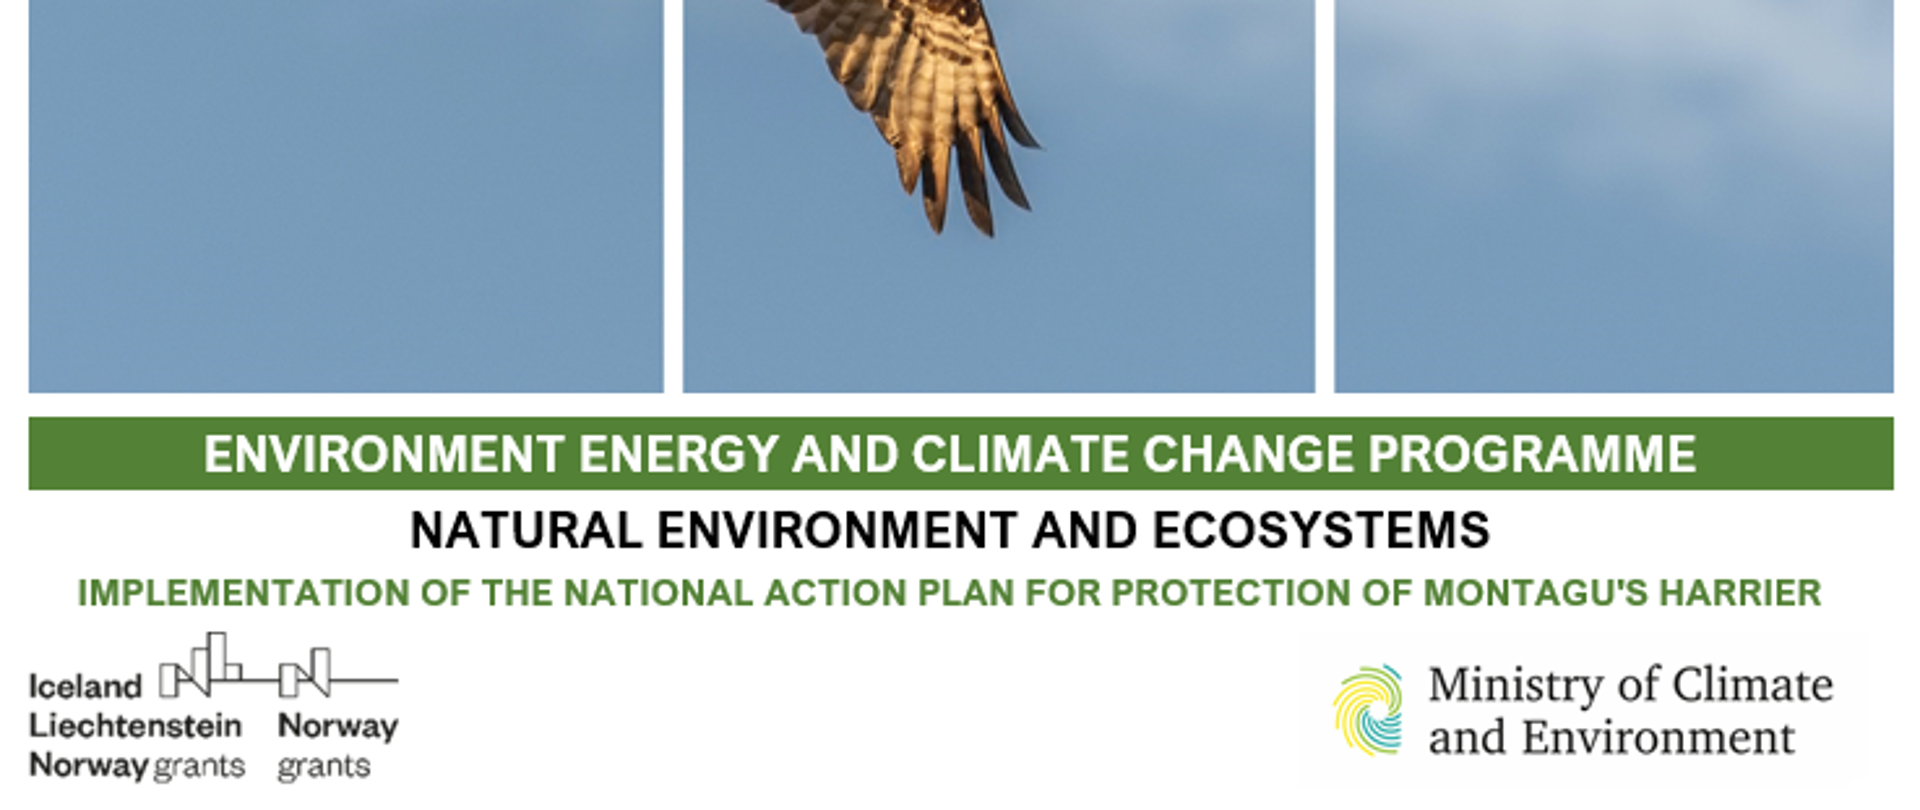 Implementation Of The National Action Plan For Protection Of Montagu's Harrier EEA GRANTS